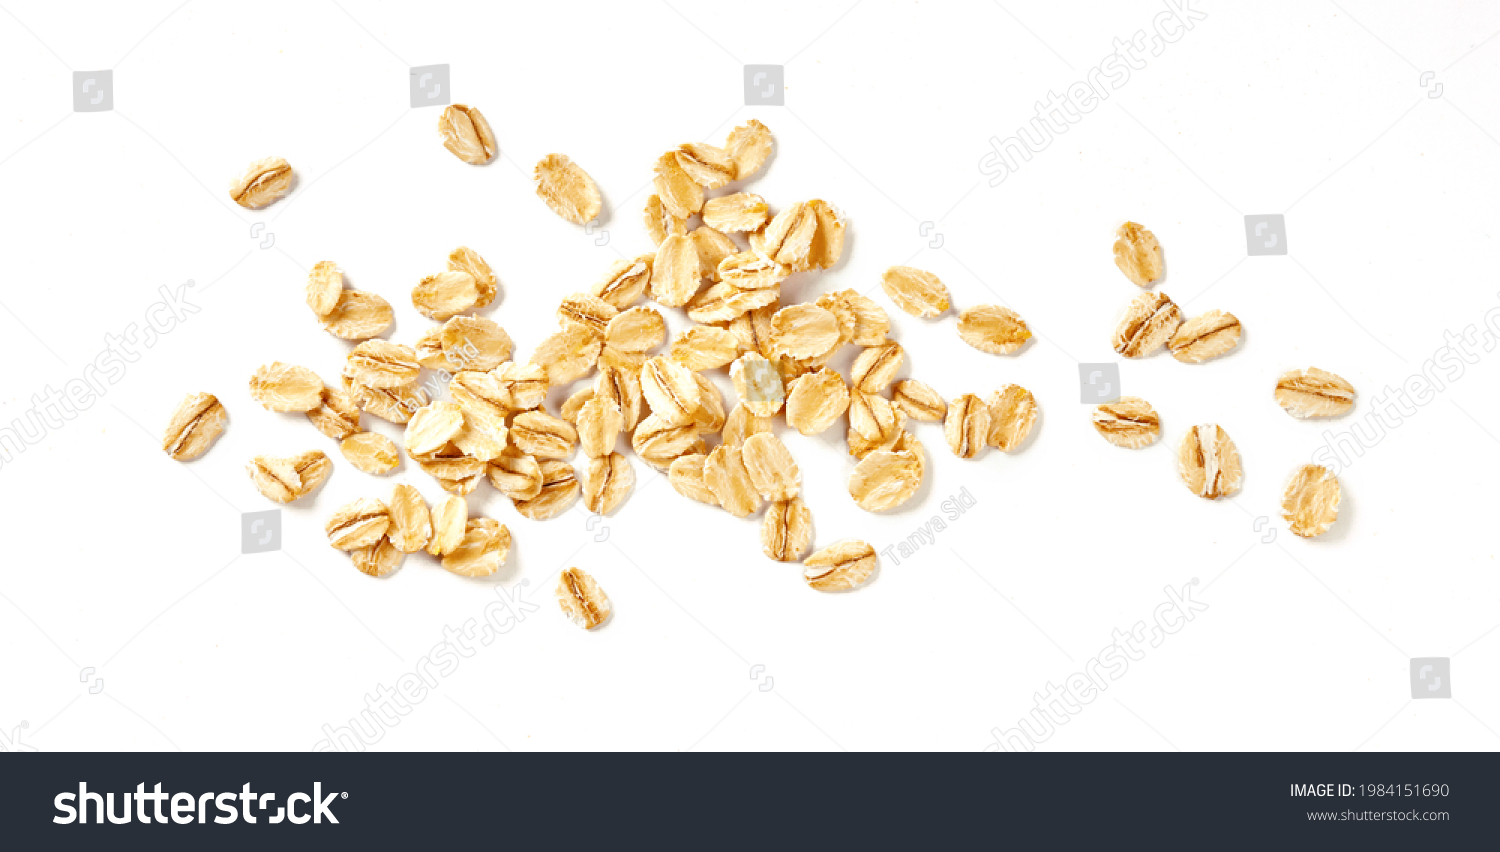 Oat flakes isolated on white background. Flakes for oatmeal and granola. Image of oat flakes for you design. #1984151690